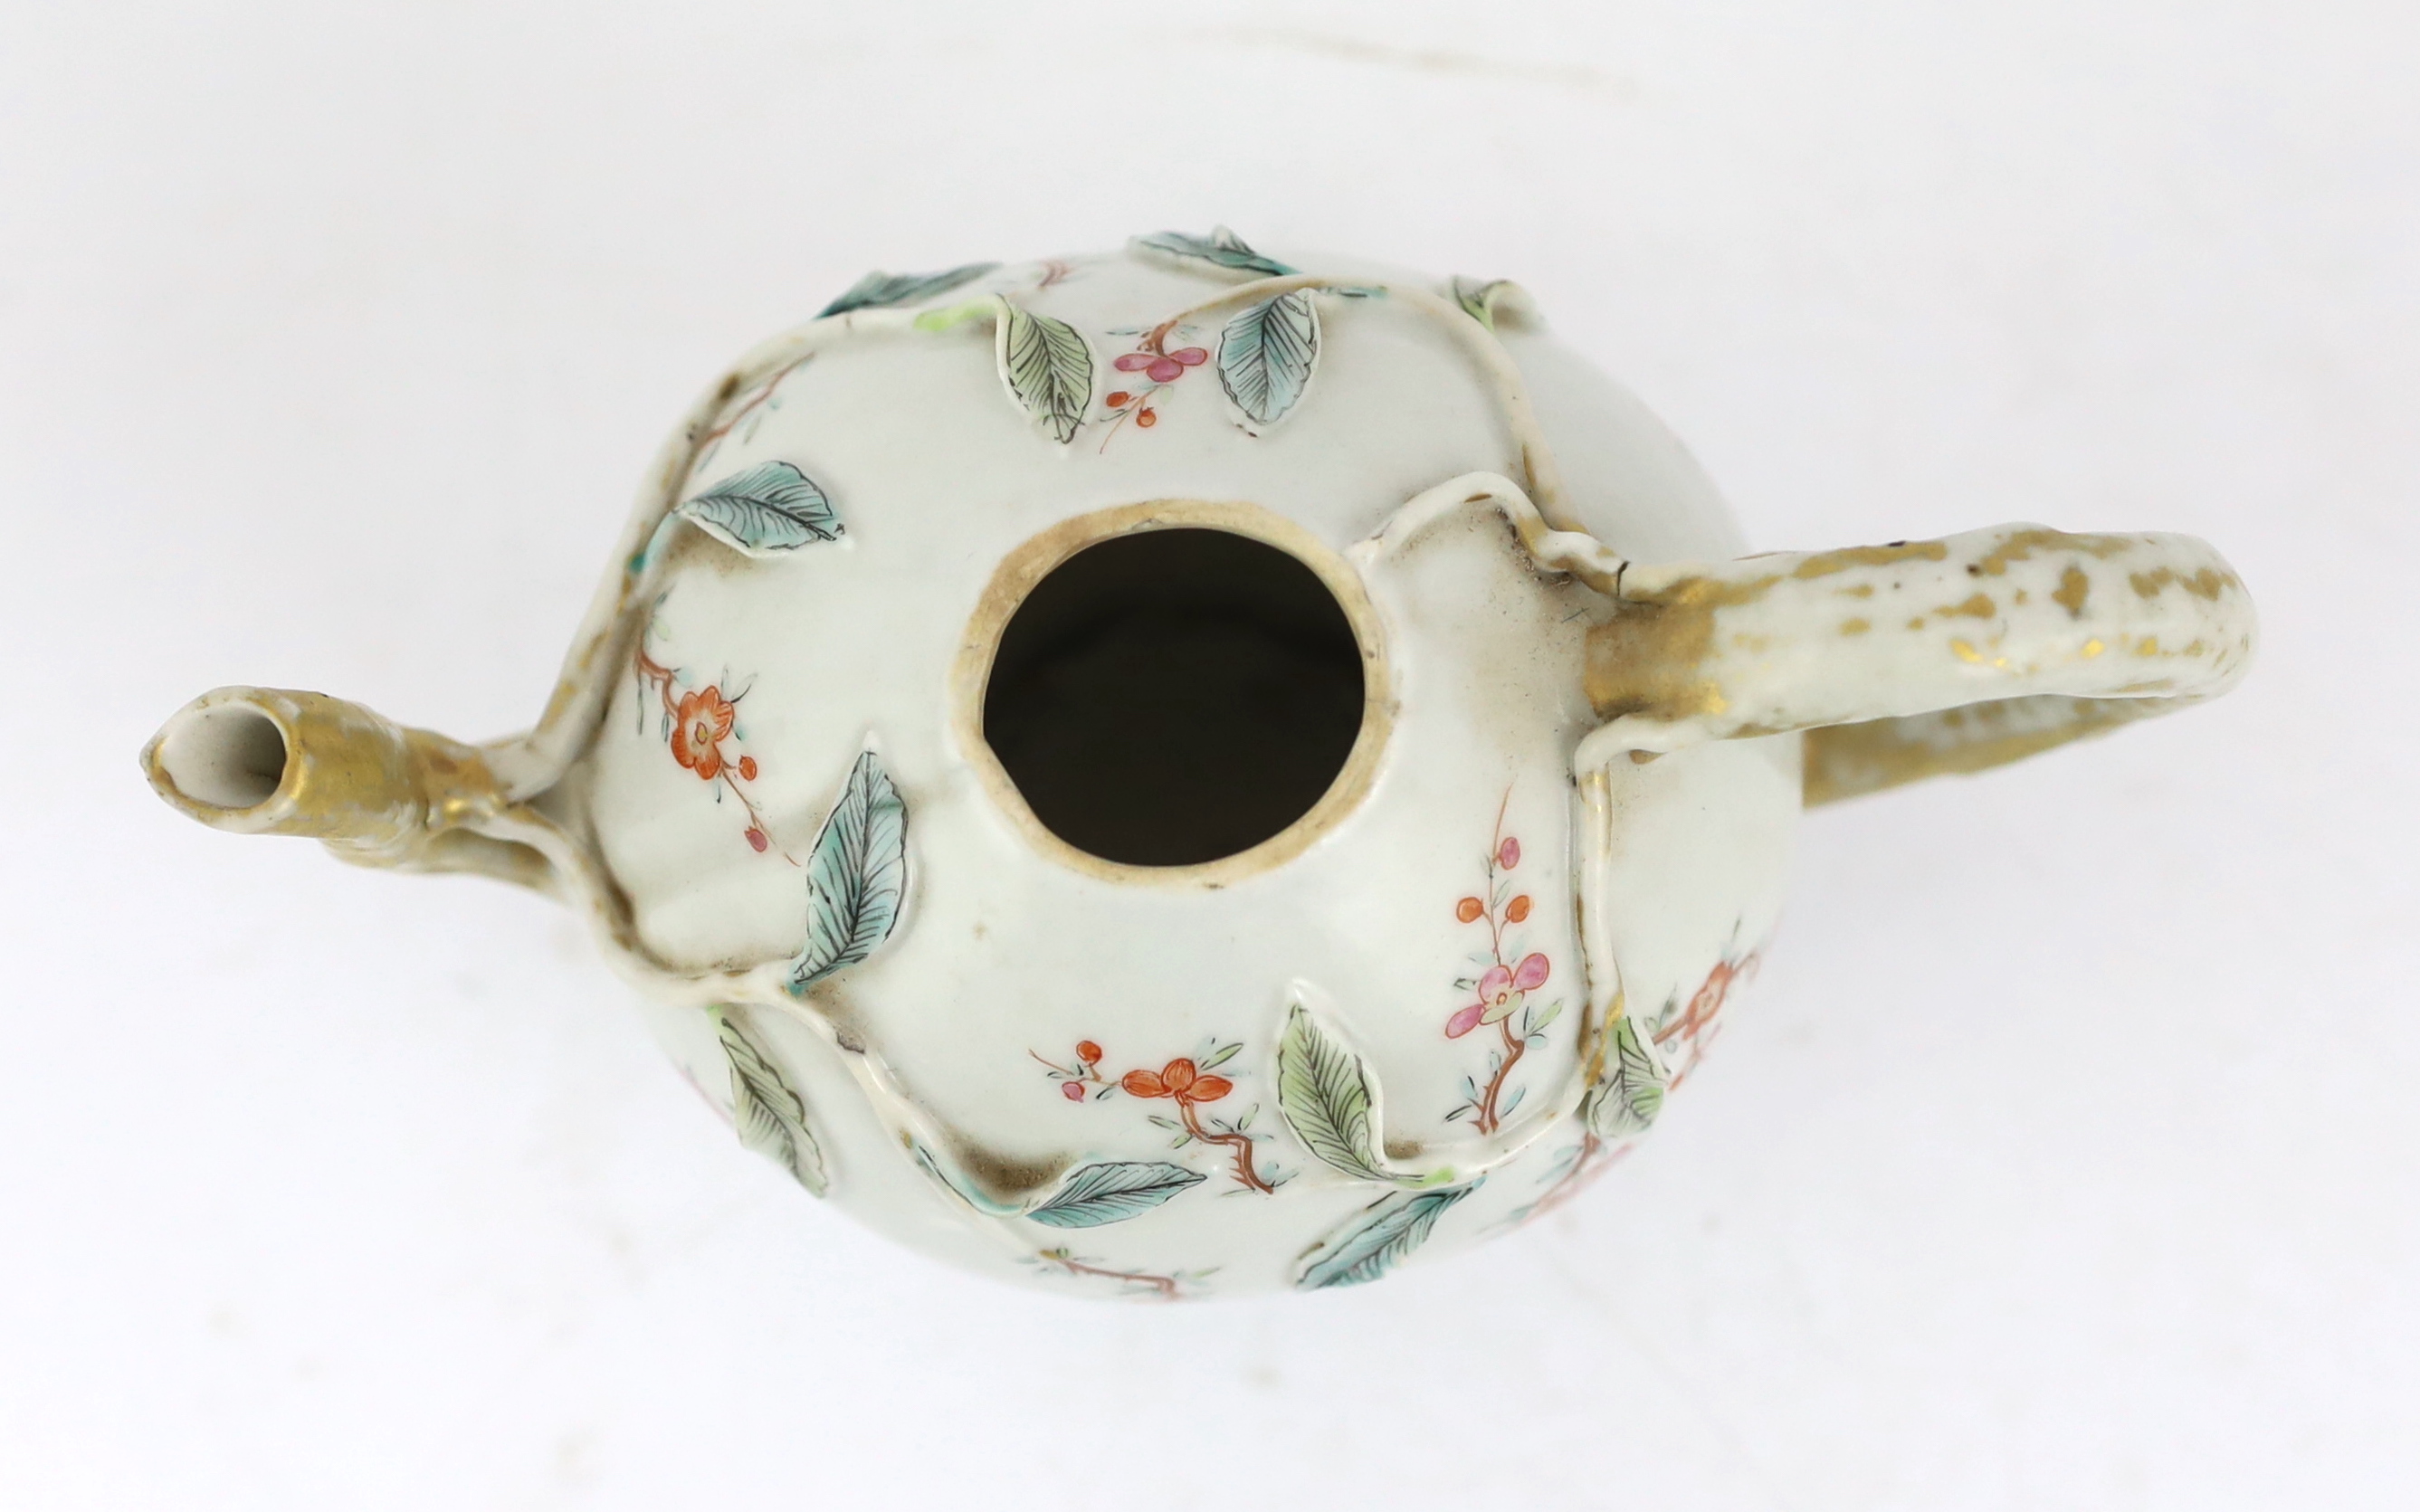 A Chinese enamelled porcelain peach-shaped teapot, Qianlong period (1736-95), wear to gilding